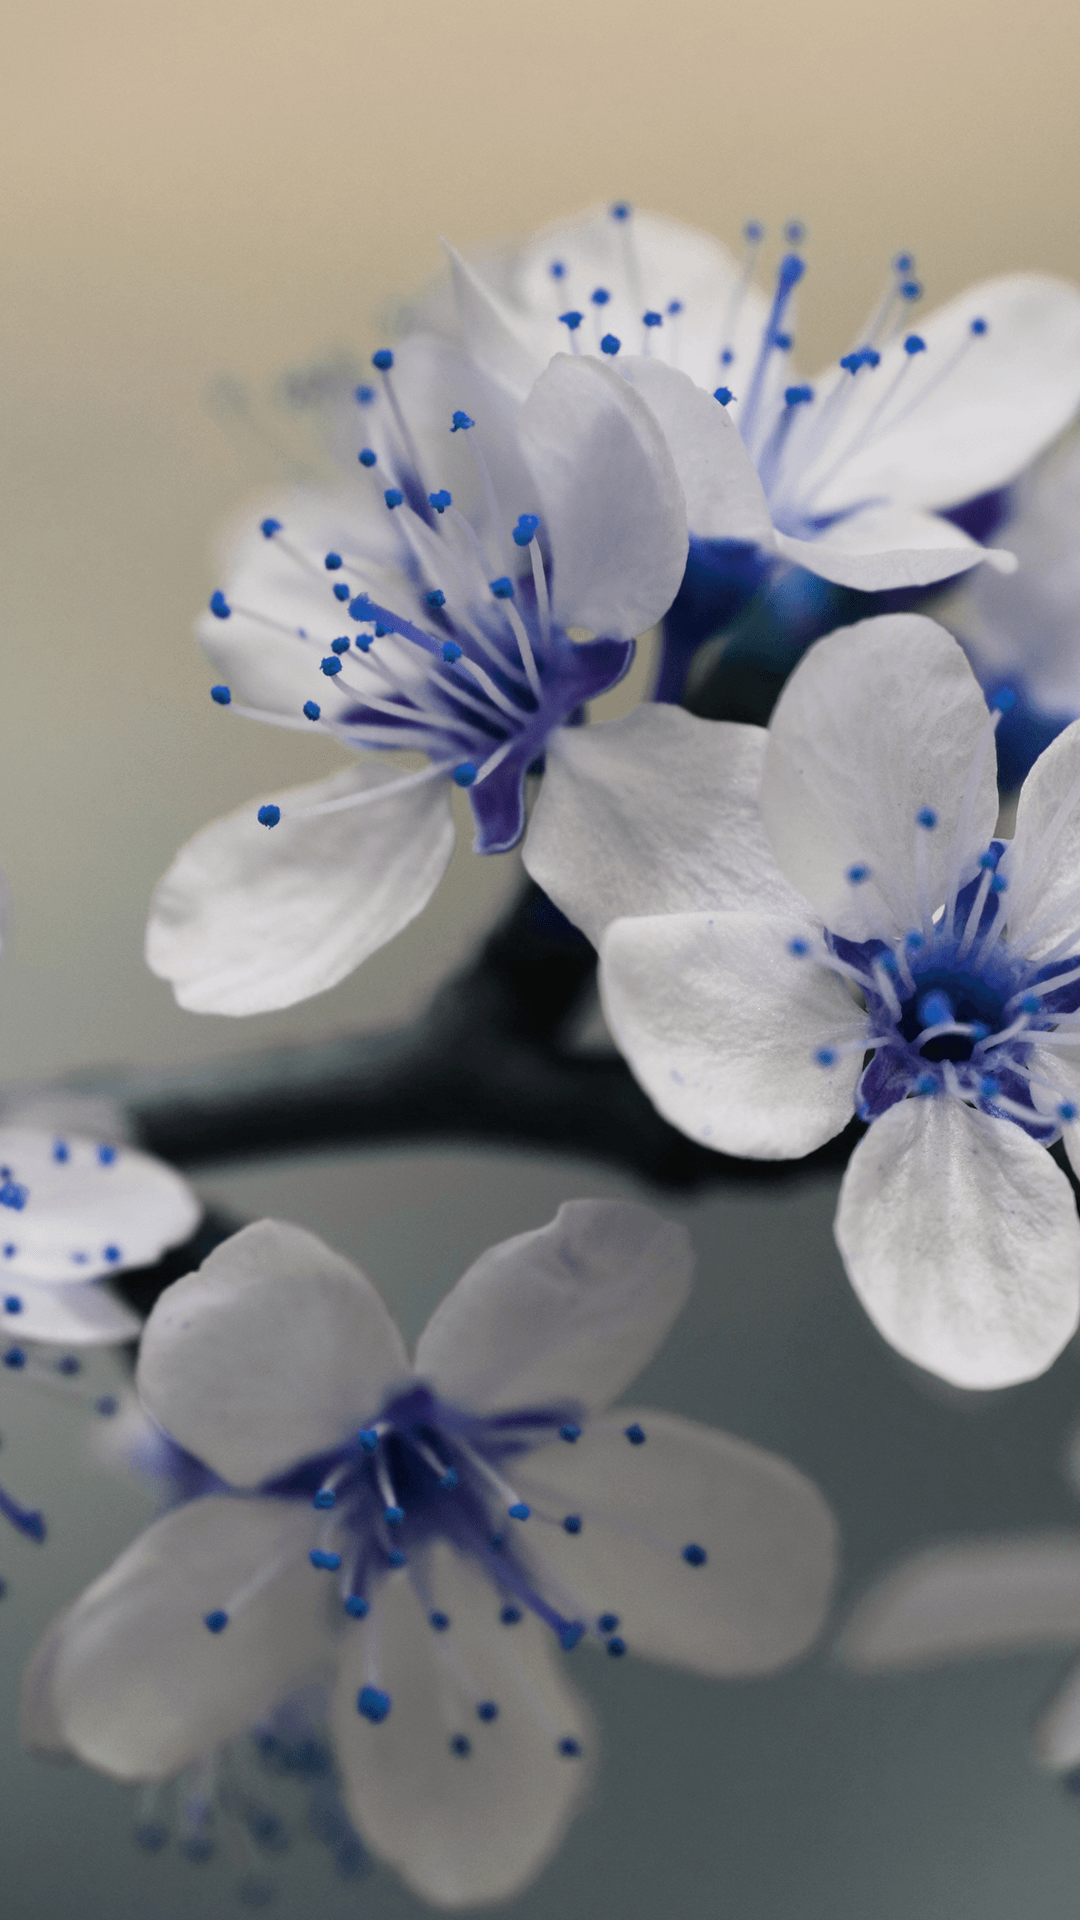 Free HD Beautiful Blue Flowers iPhone Wallpaper For Download .0314